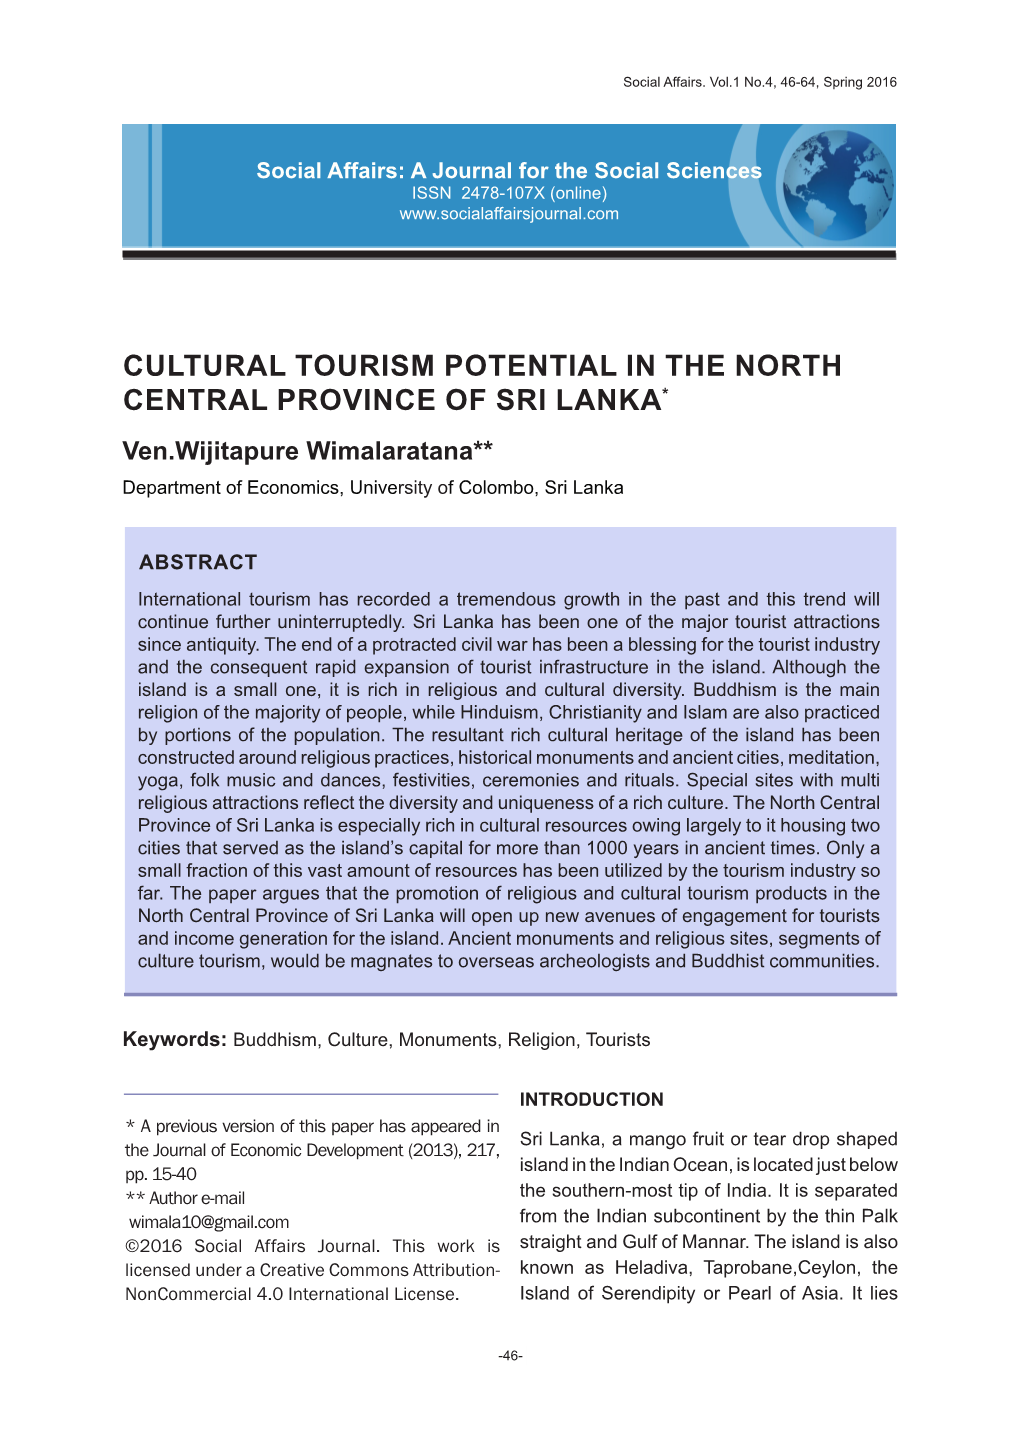 4. Cultural Tourism Potential in the North Central Province of Sri Lanka